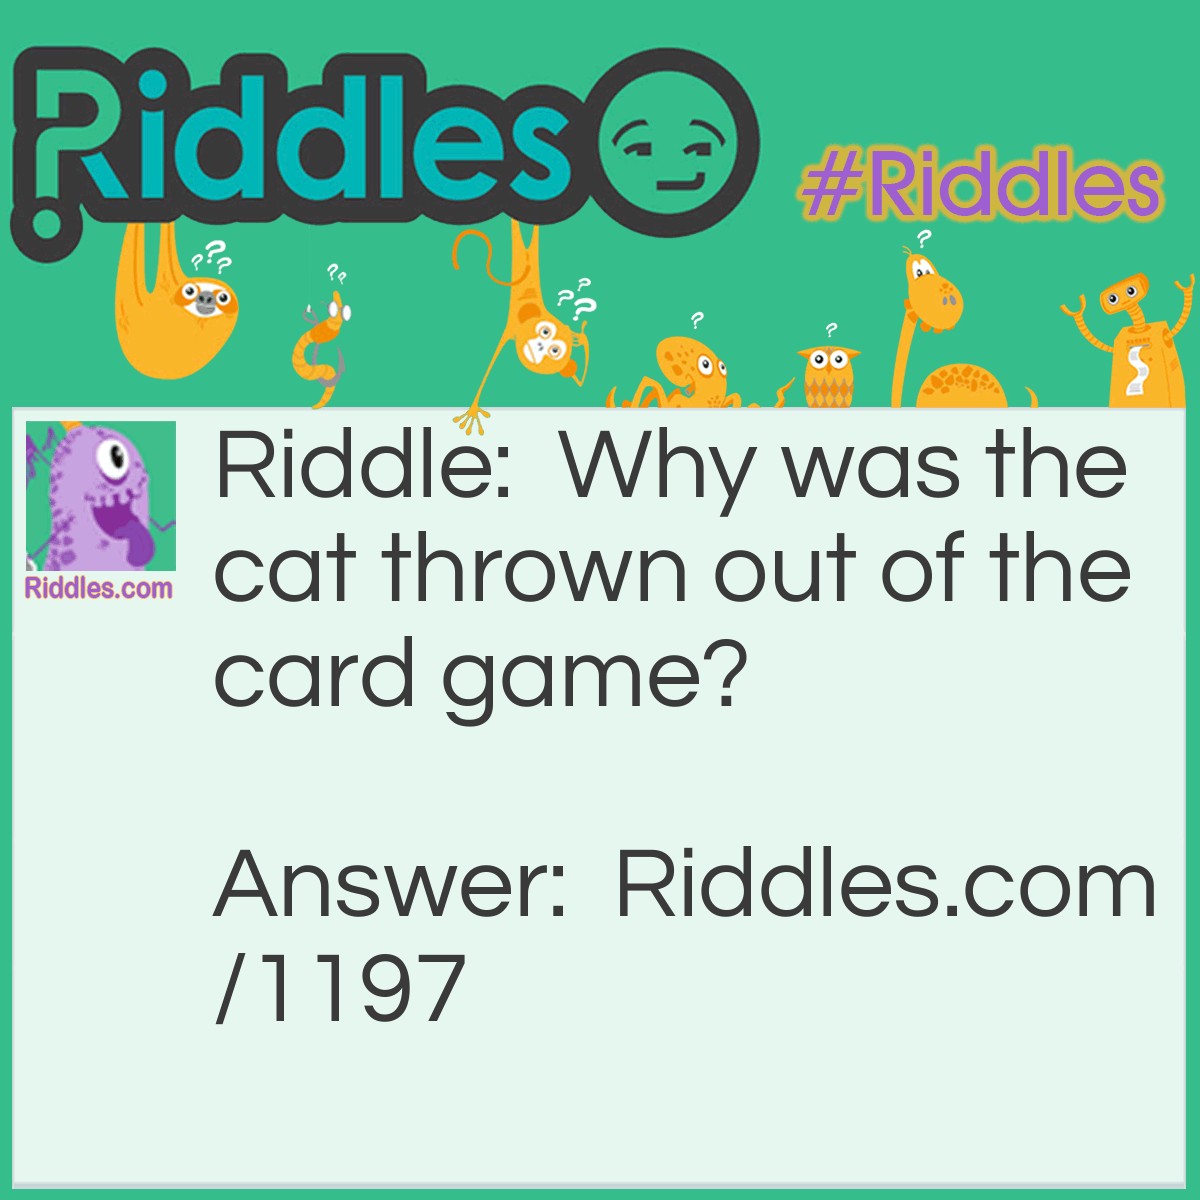 Riddle: Why was the cat thrown out of the card game? Answer: Because he was a Cheetah!